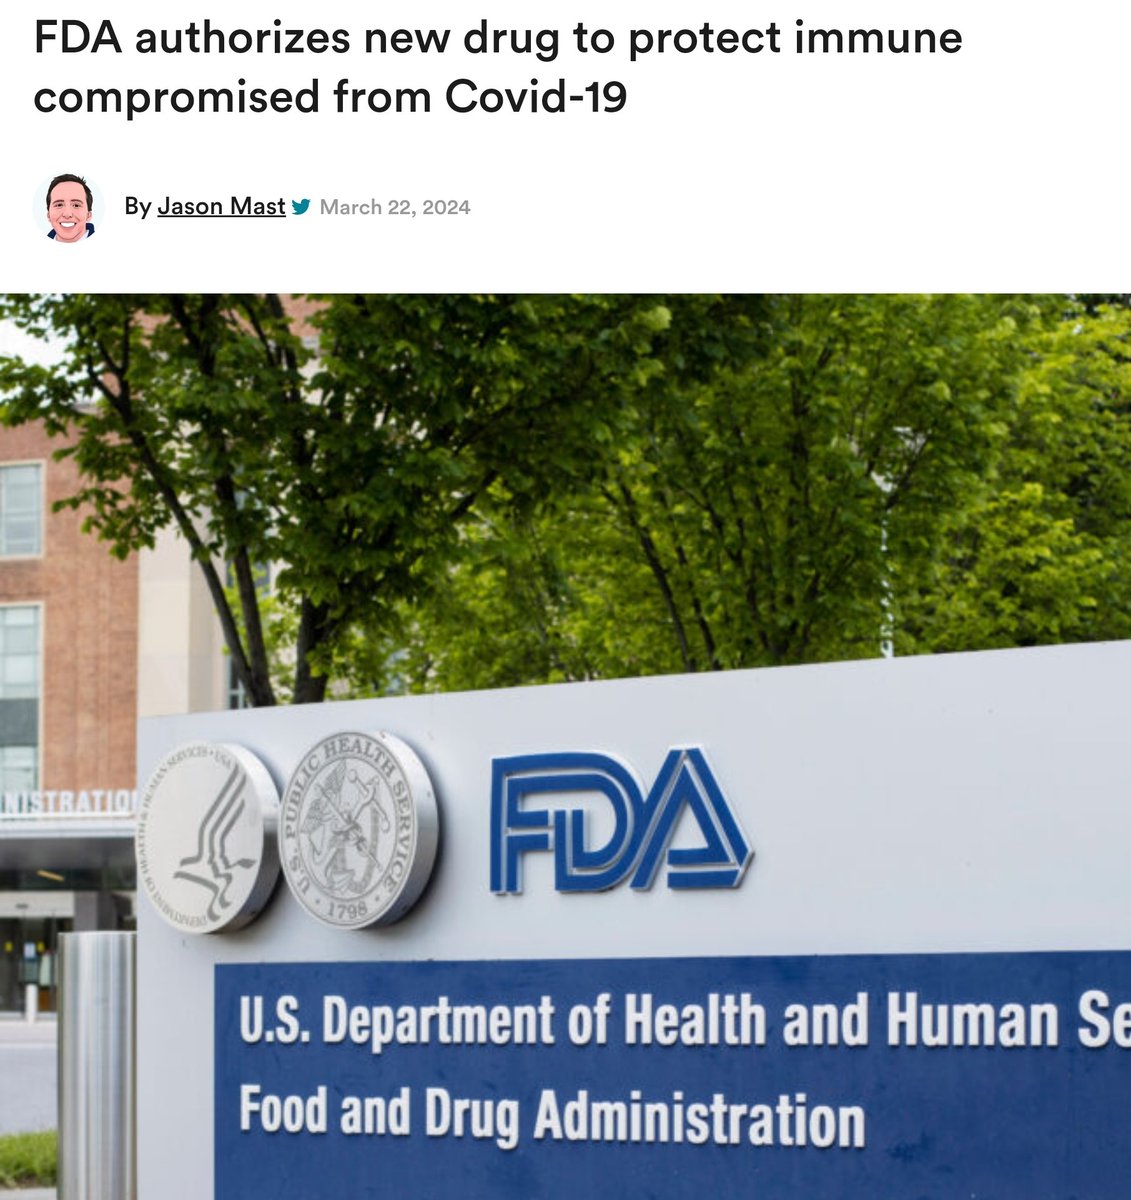 Monoclonal antibodies are back! Today, FDA issued EUA approval of Pemgarda for pre-exposure prophylaxis (prevention) for immunocompromised individuals 12+. This is the first option we've had since Evusheld's authorization was revoked.
statnews.com/2024/03/22/cov…